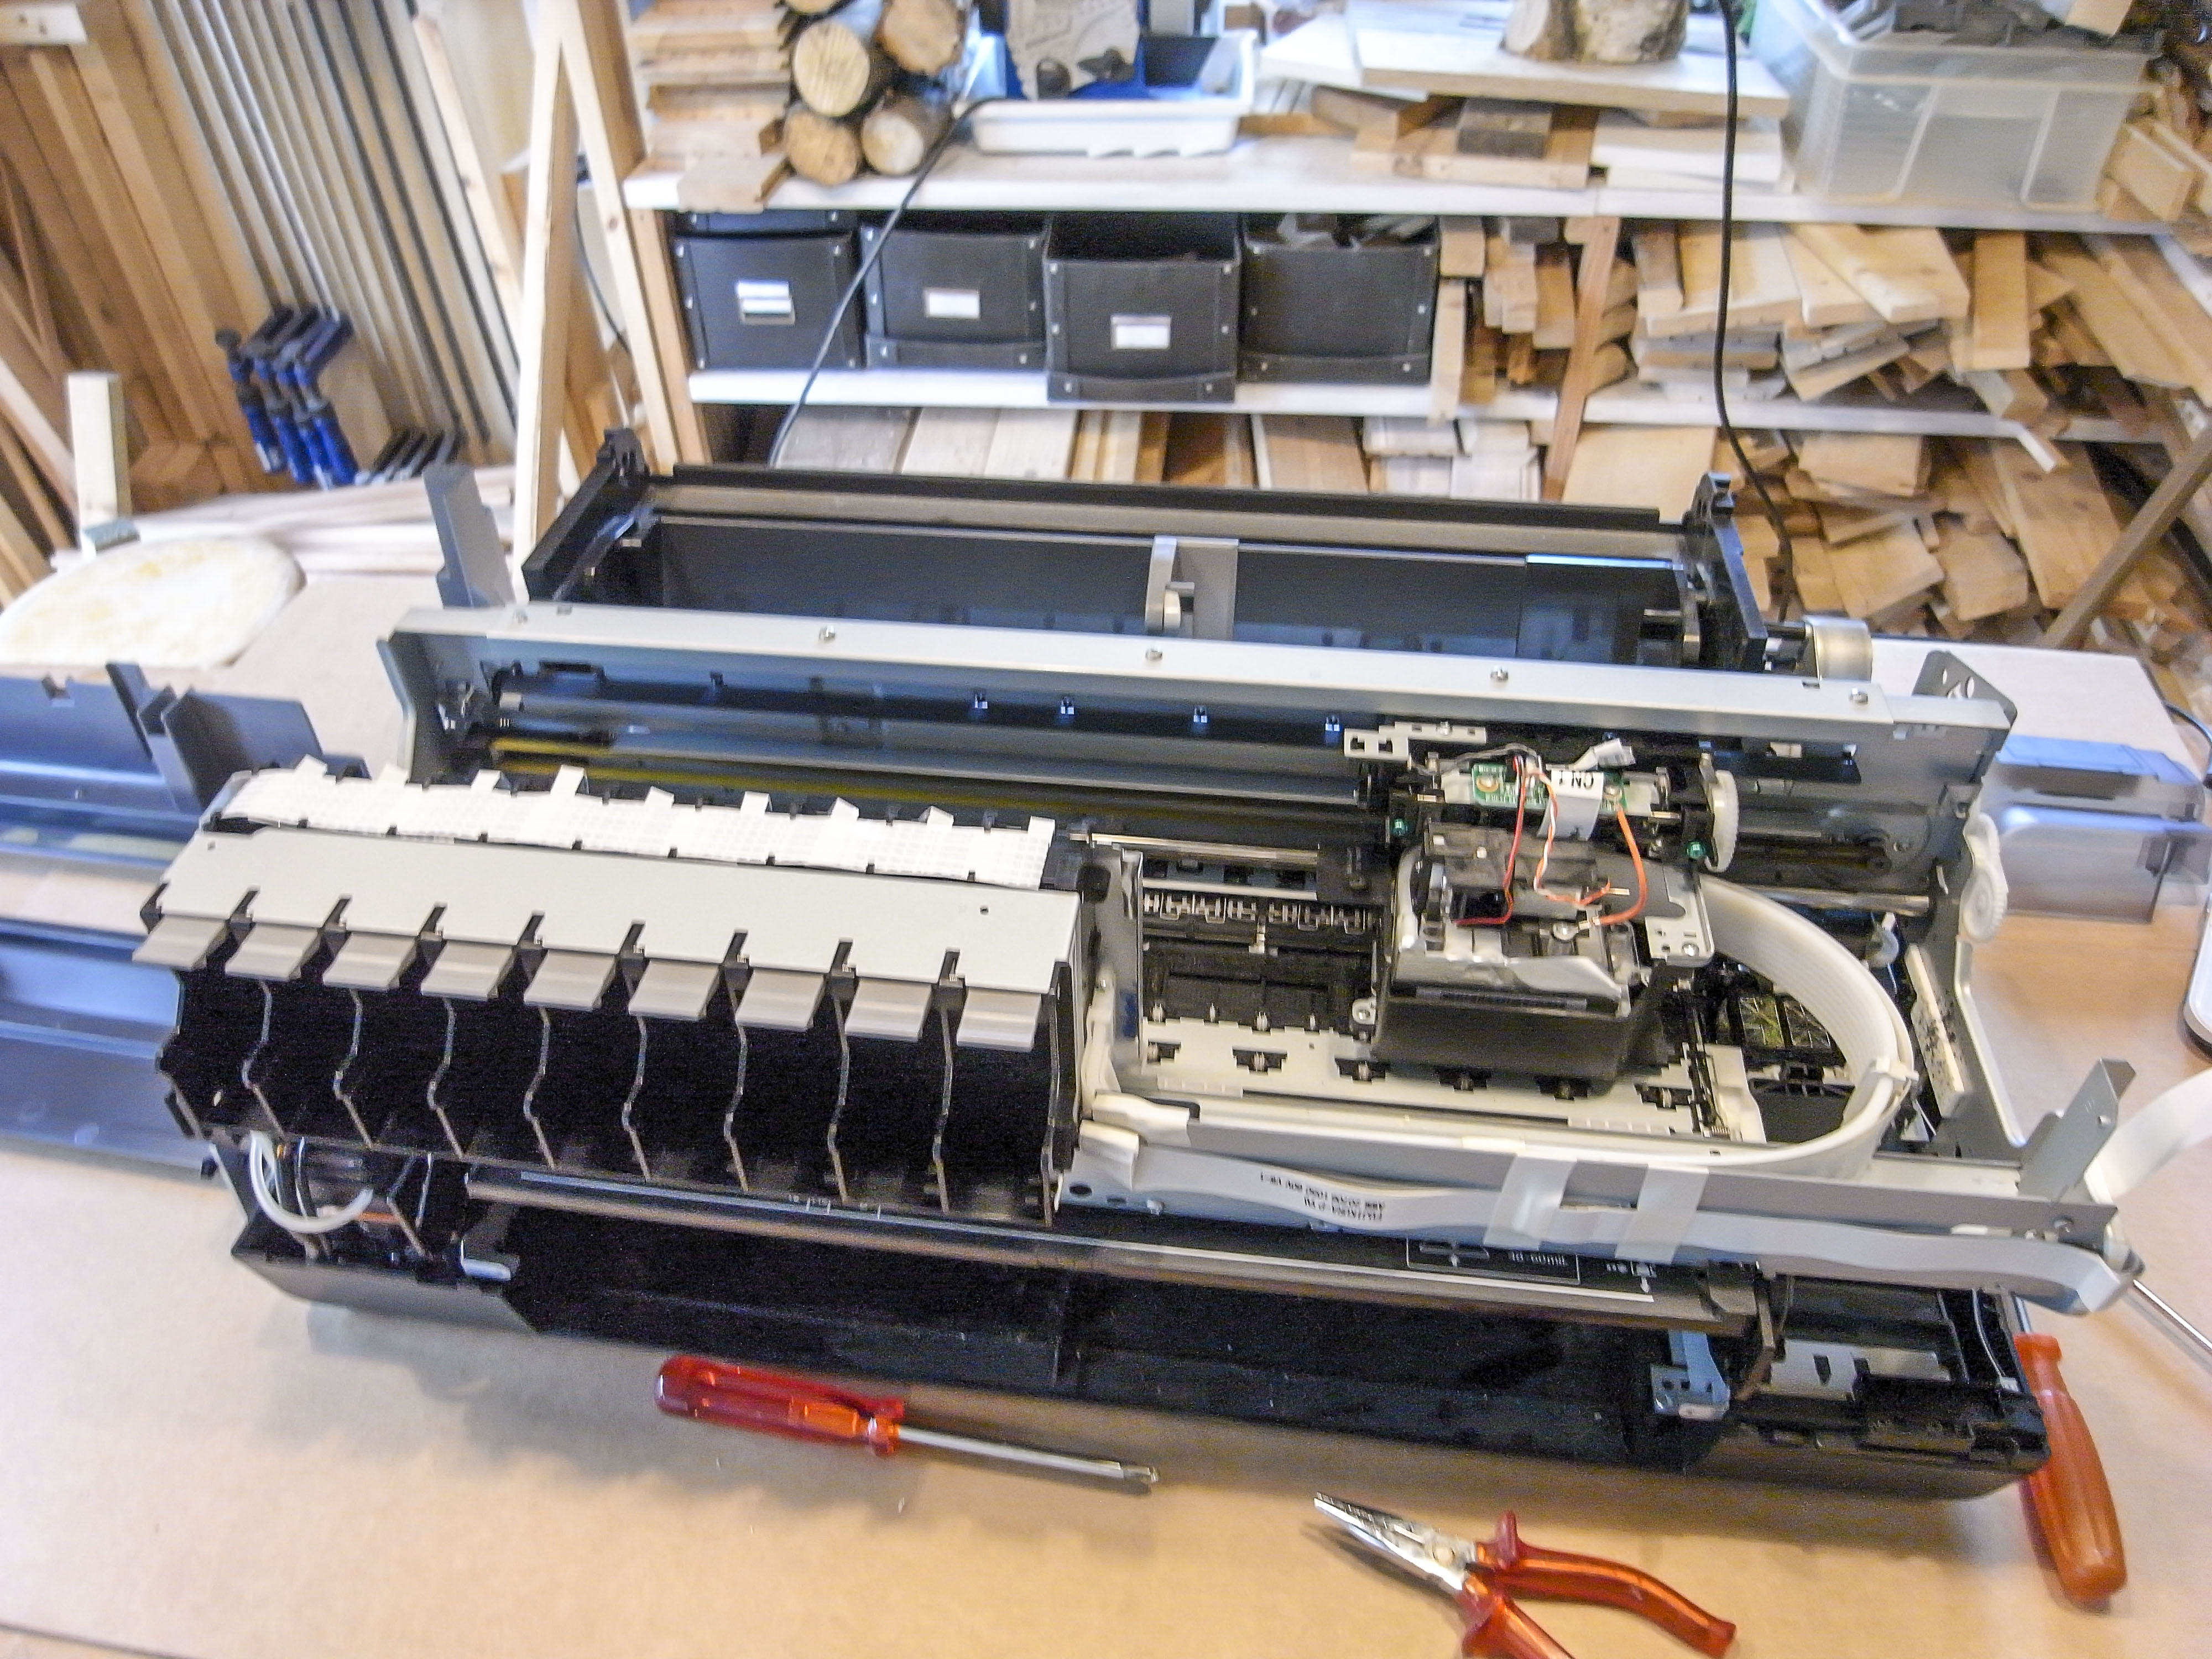 Epson 3800 on the repair bench